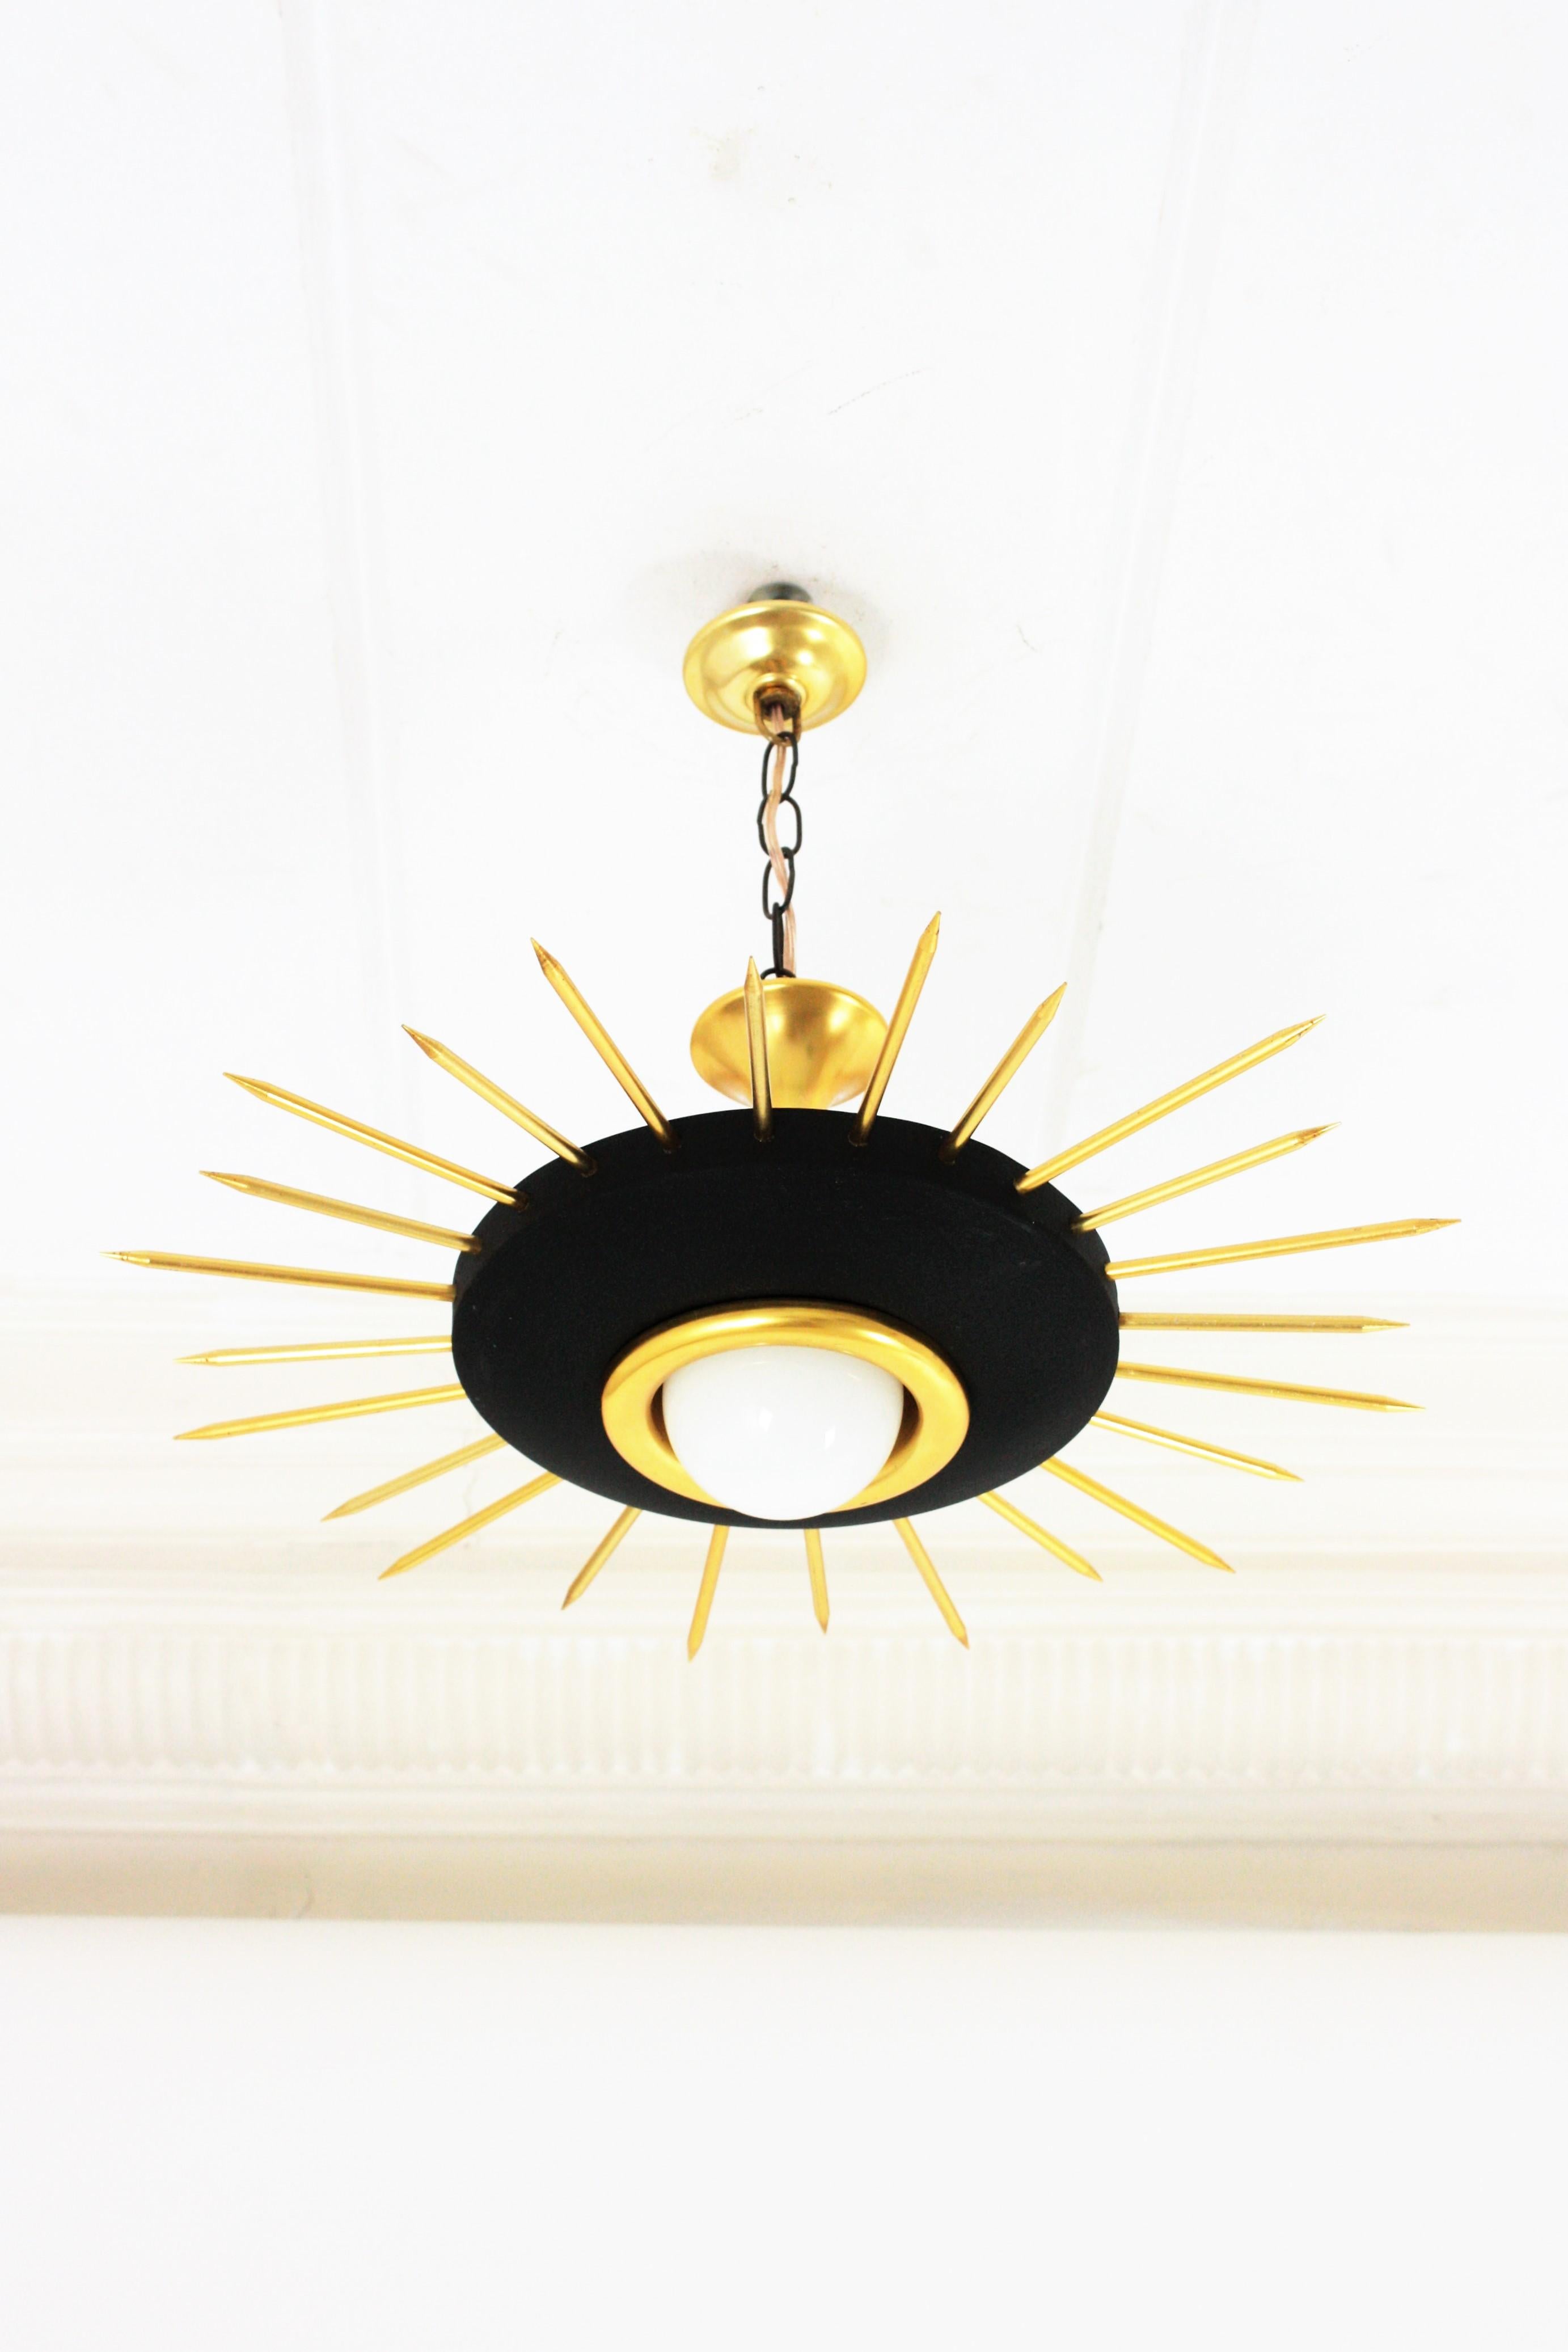 Mid-Century Modern BLACK metal and BRASS sunburst suspension light, chandelier or light fixture. Italy, 1950s.
This eye-catching ceiling lamp features a black lacquered metal shade surrounded by brass thick rays in two sizes. It has a central light